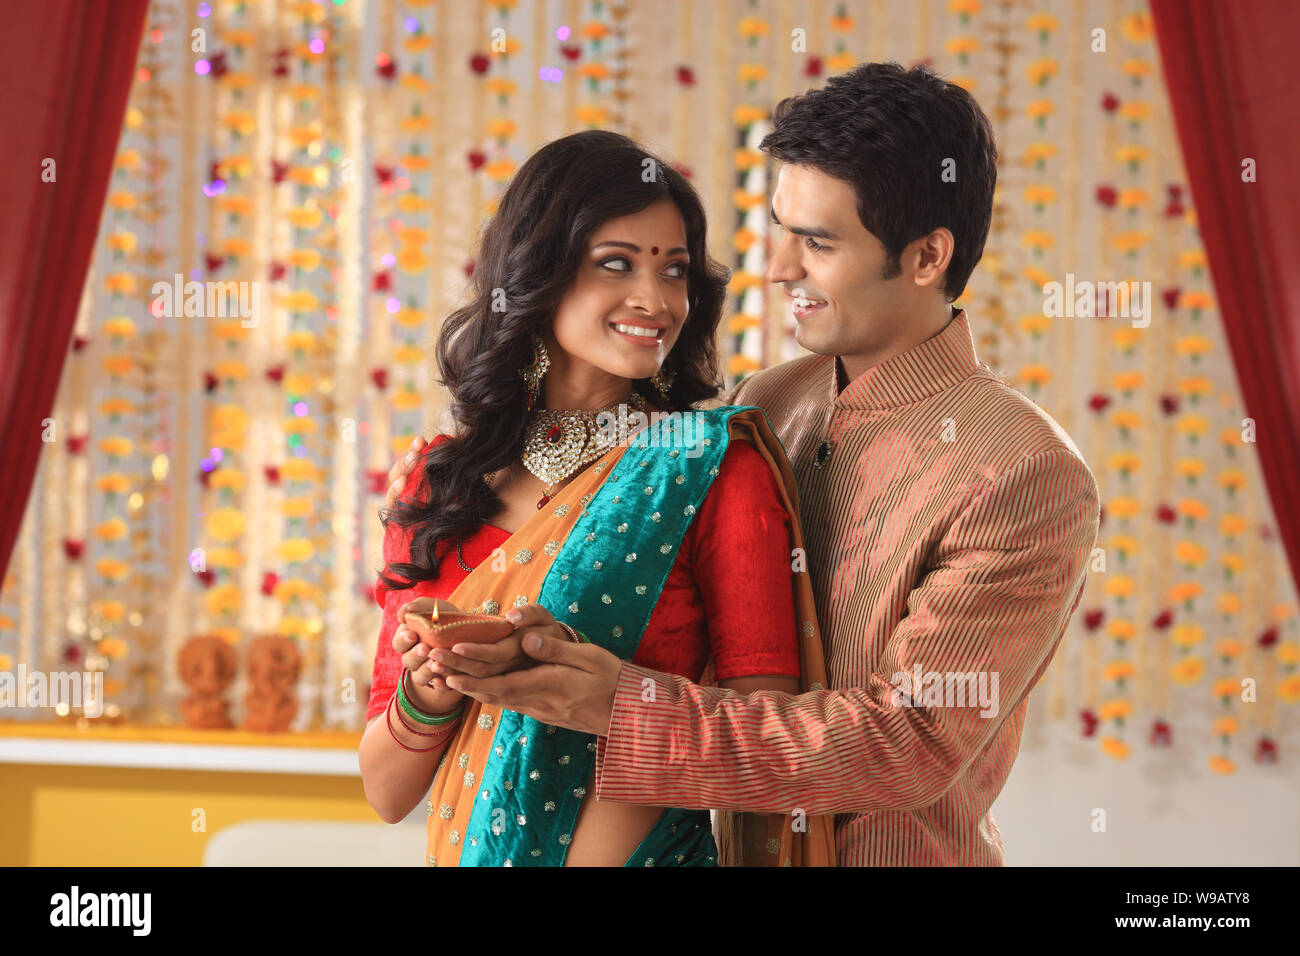 Young couple holding a diya and smiling Stock Photo